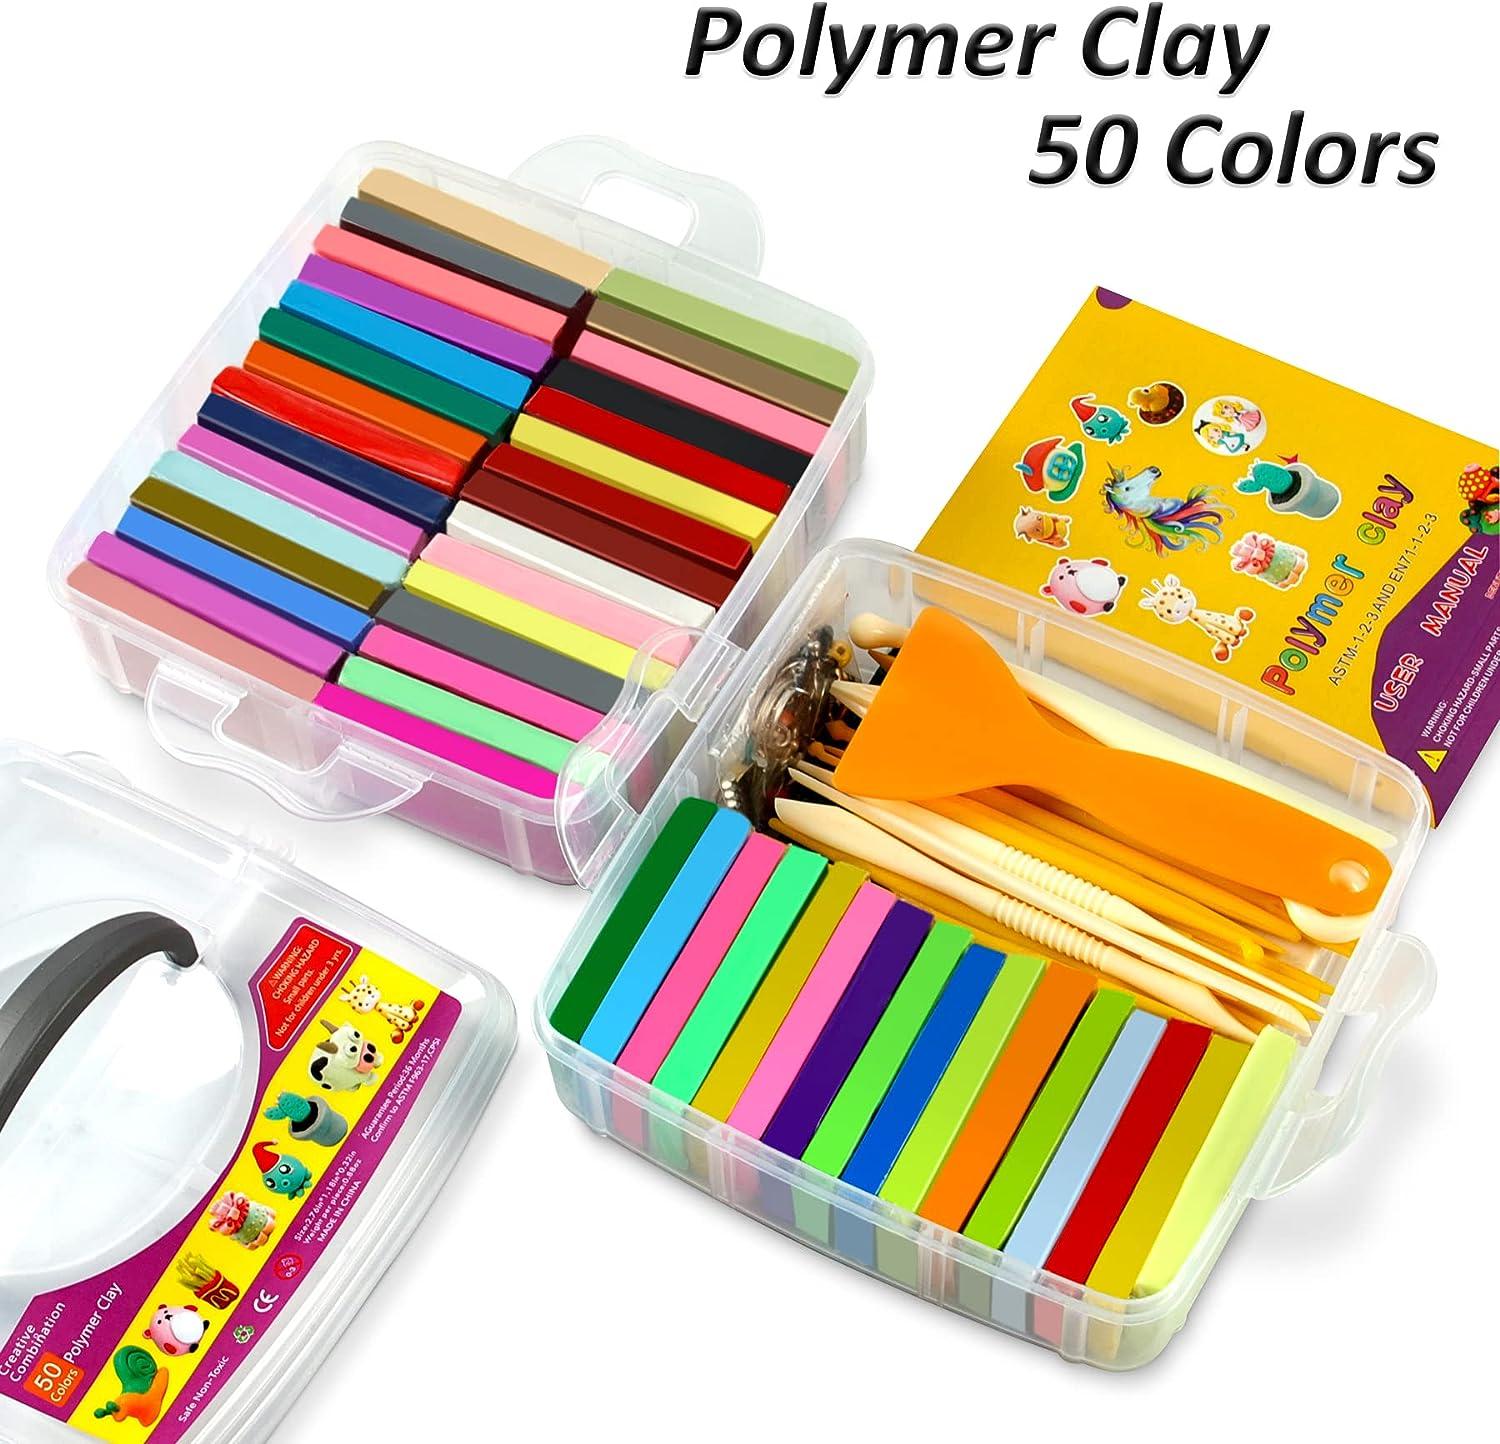 Polymer Clay 50 Colors Modeling Clay for Kids Safe and Non-Toxic Oven Bake  Clay with Sculpting Tools and Accessories Ideal Halloween Christmas Gift  for Children and Artists.